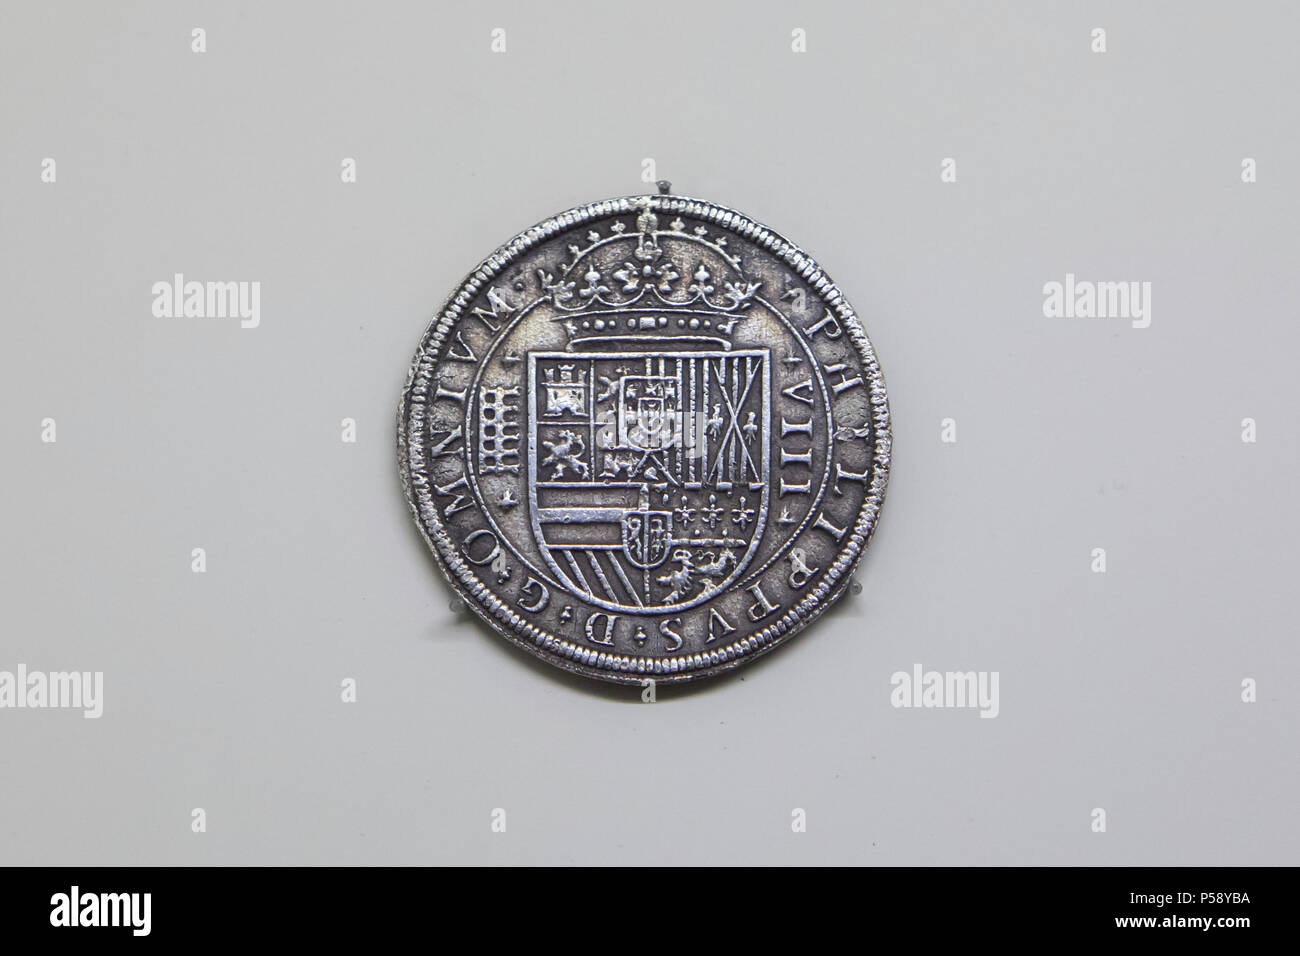 Spanish dollar of King Philip II of Spain. Spanish silver coin also known as the Real de a Ocho or the Piece of Eight minted in Segovia (1597) on display in the National Archaeological Museum (Museo Arqueológico Nacional) in Madrid, Spain. The great coat of arms of the Hispanic Monarchy is depicted in the coin. The Roman aqueduct is depicted in the left as the mark of the Segovia Mint and as the city's most iconic monument. Stock Photo